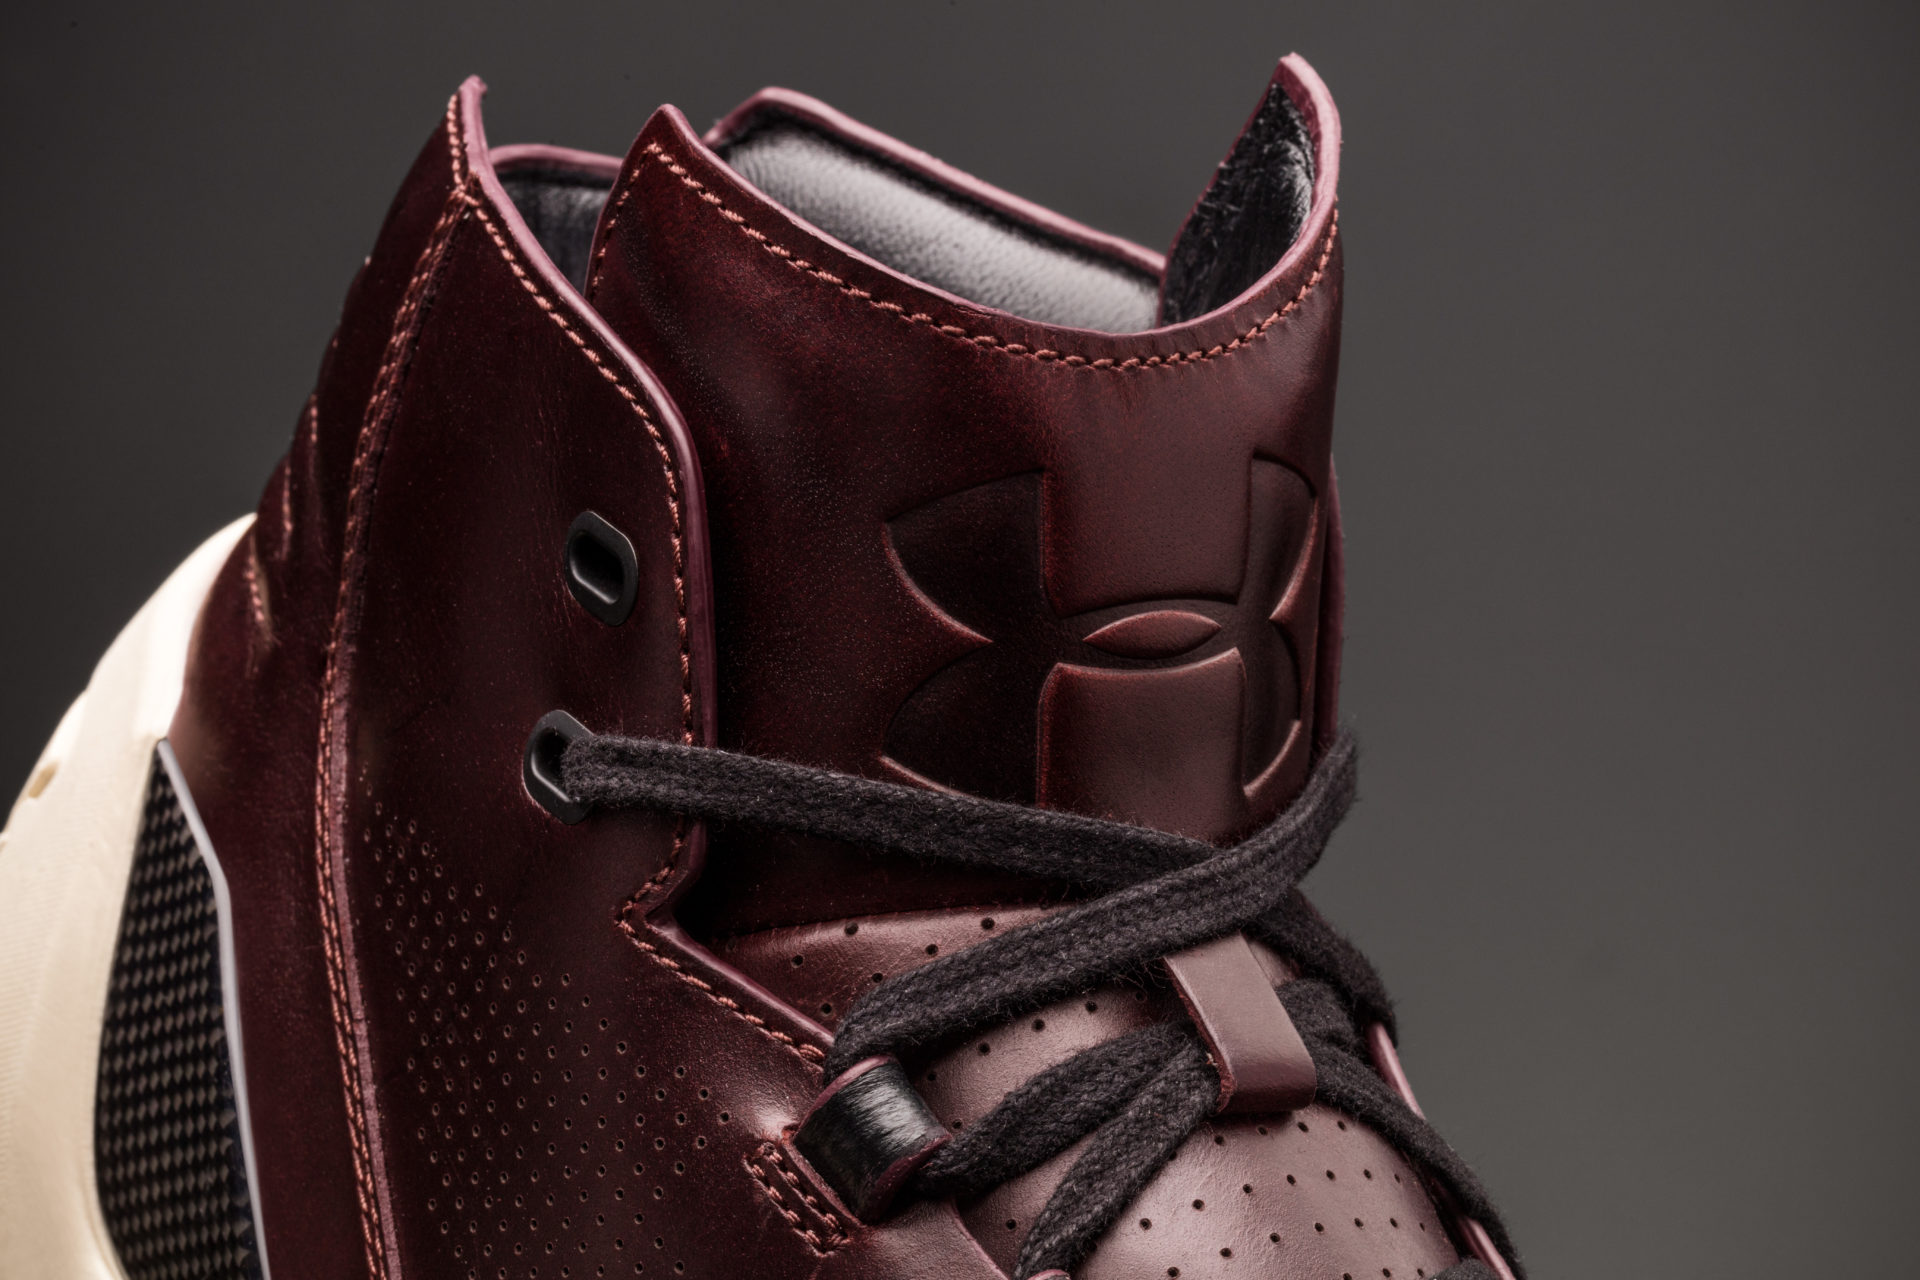 Under Armour Curry 3 Lux "Oxblood Leather"